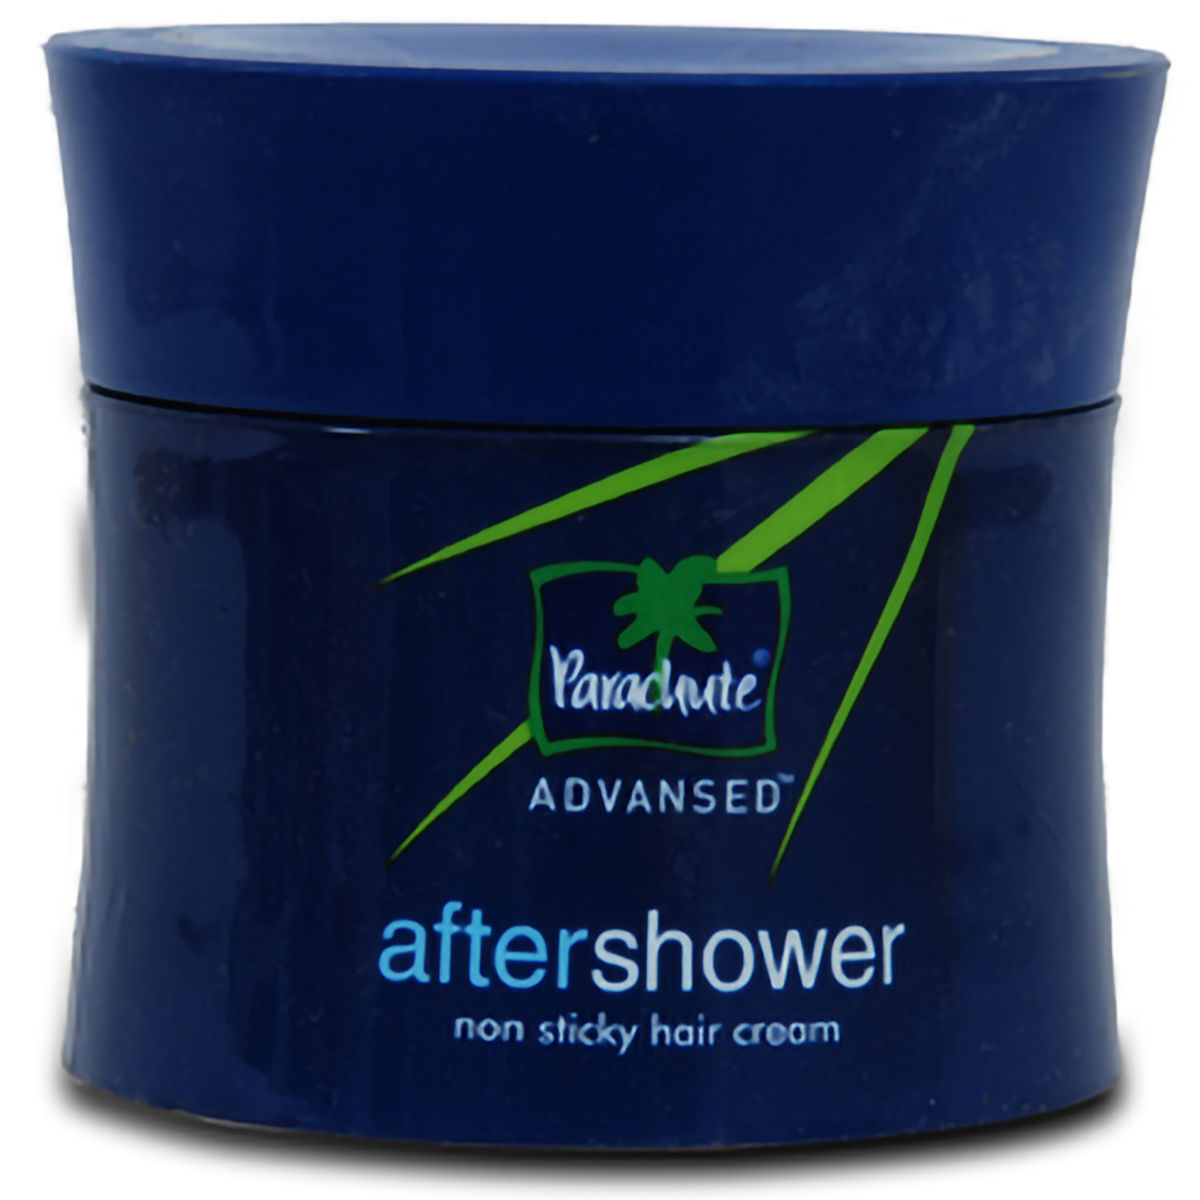 Buy Parachute Advansed After Shower Non Sticky Hair Cream, 100 gm Online